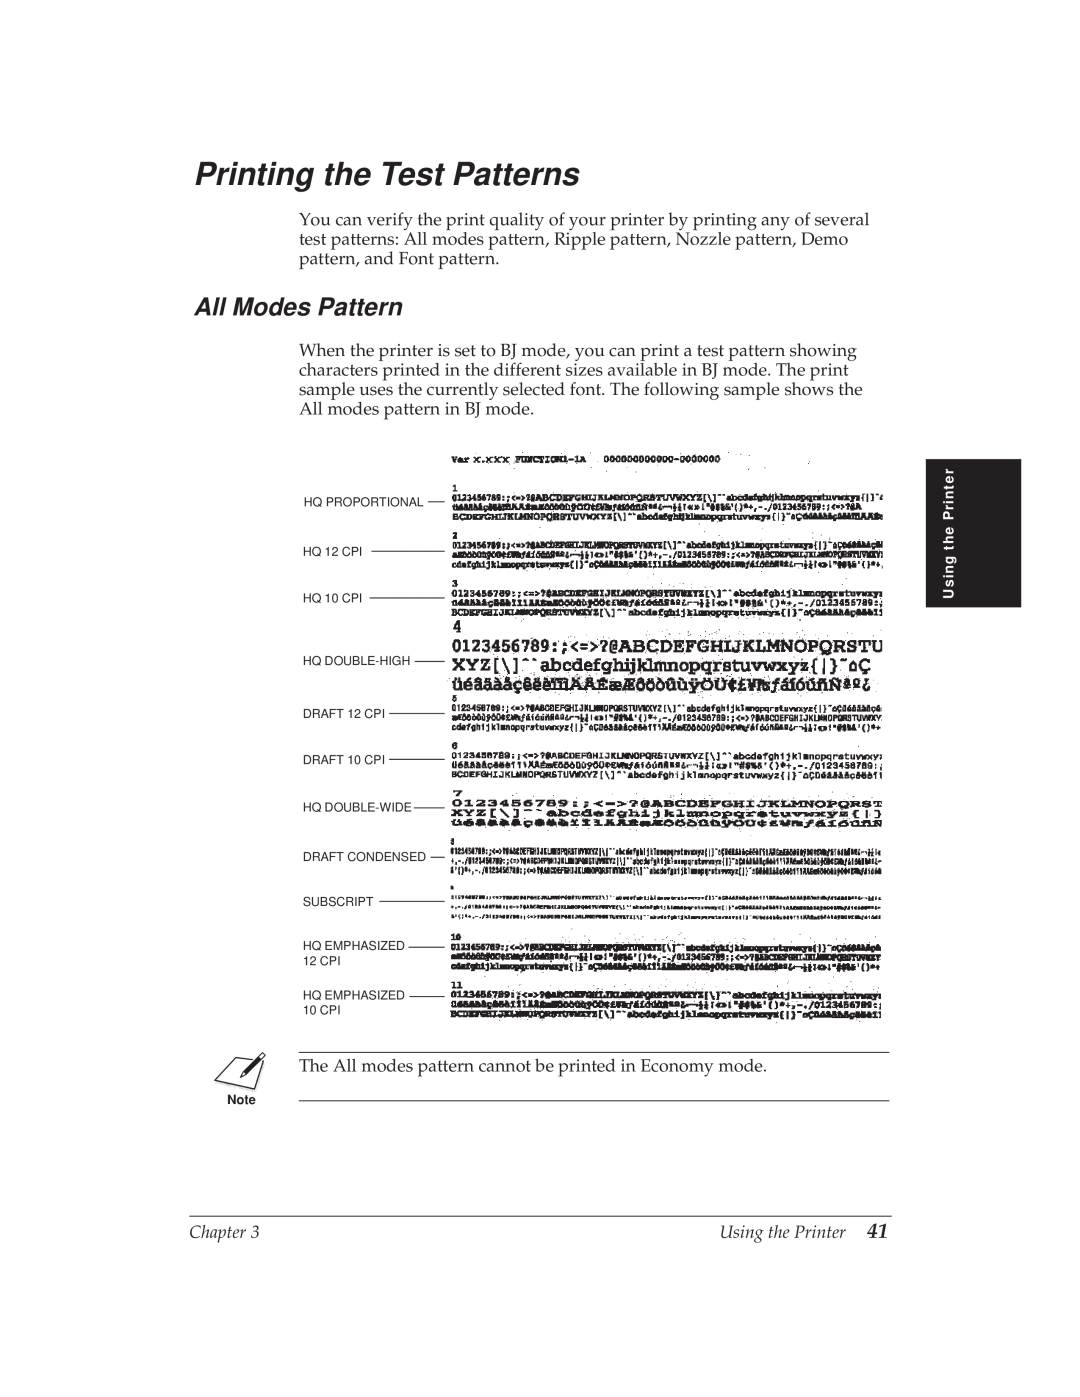 Canon BJ-30 manual Printing the Test Patterns, All Modes Pattern 